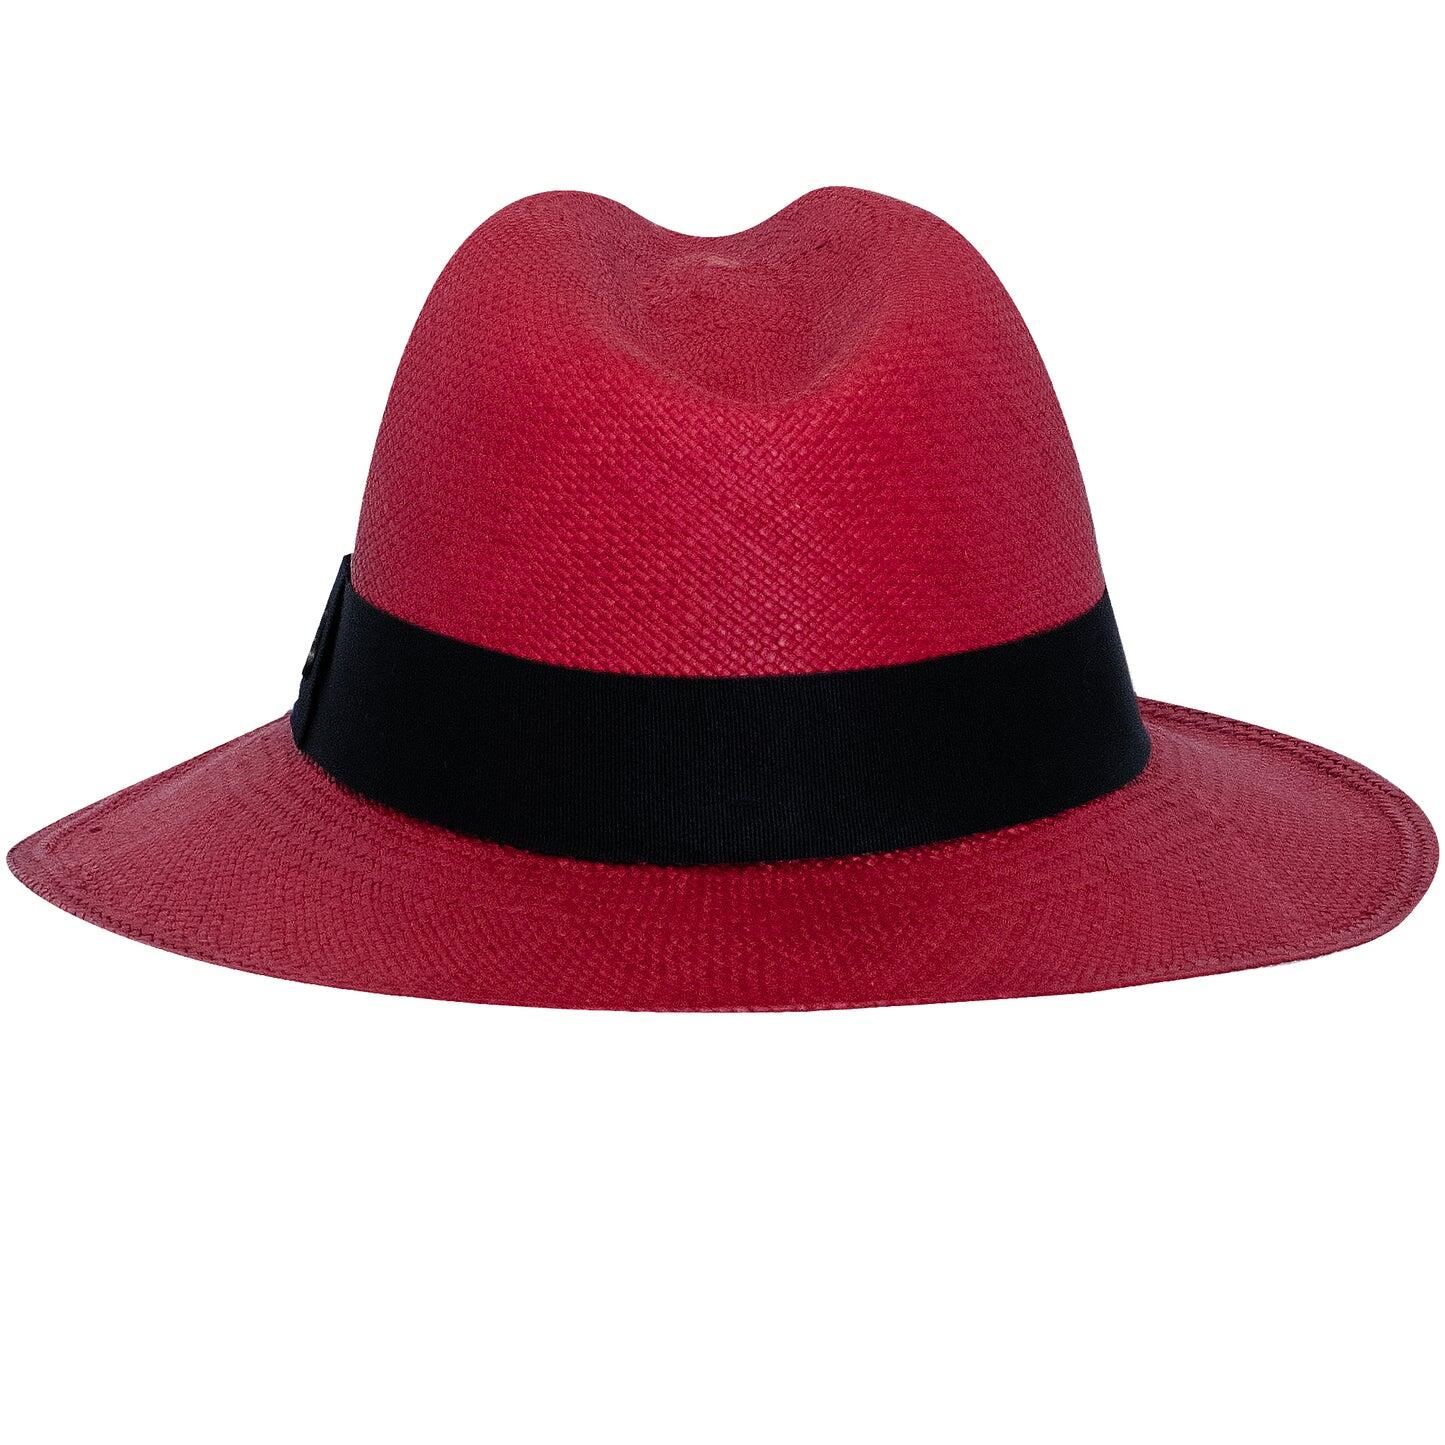 Panama Hat Unisex Classic Red with Black Band